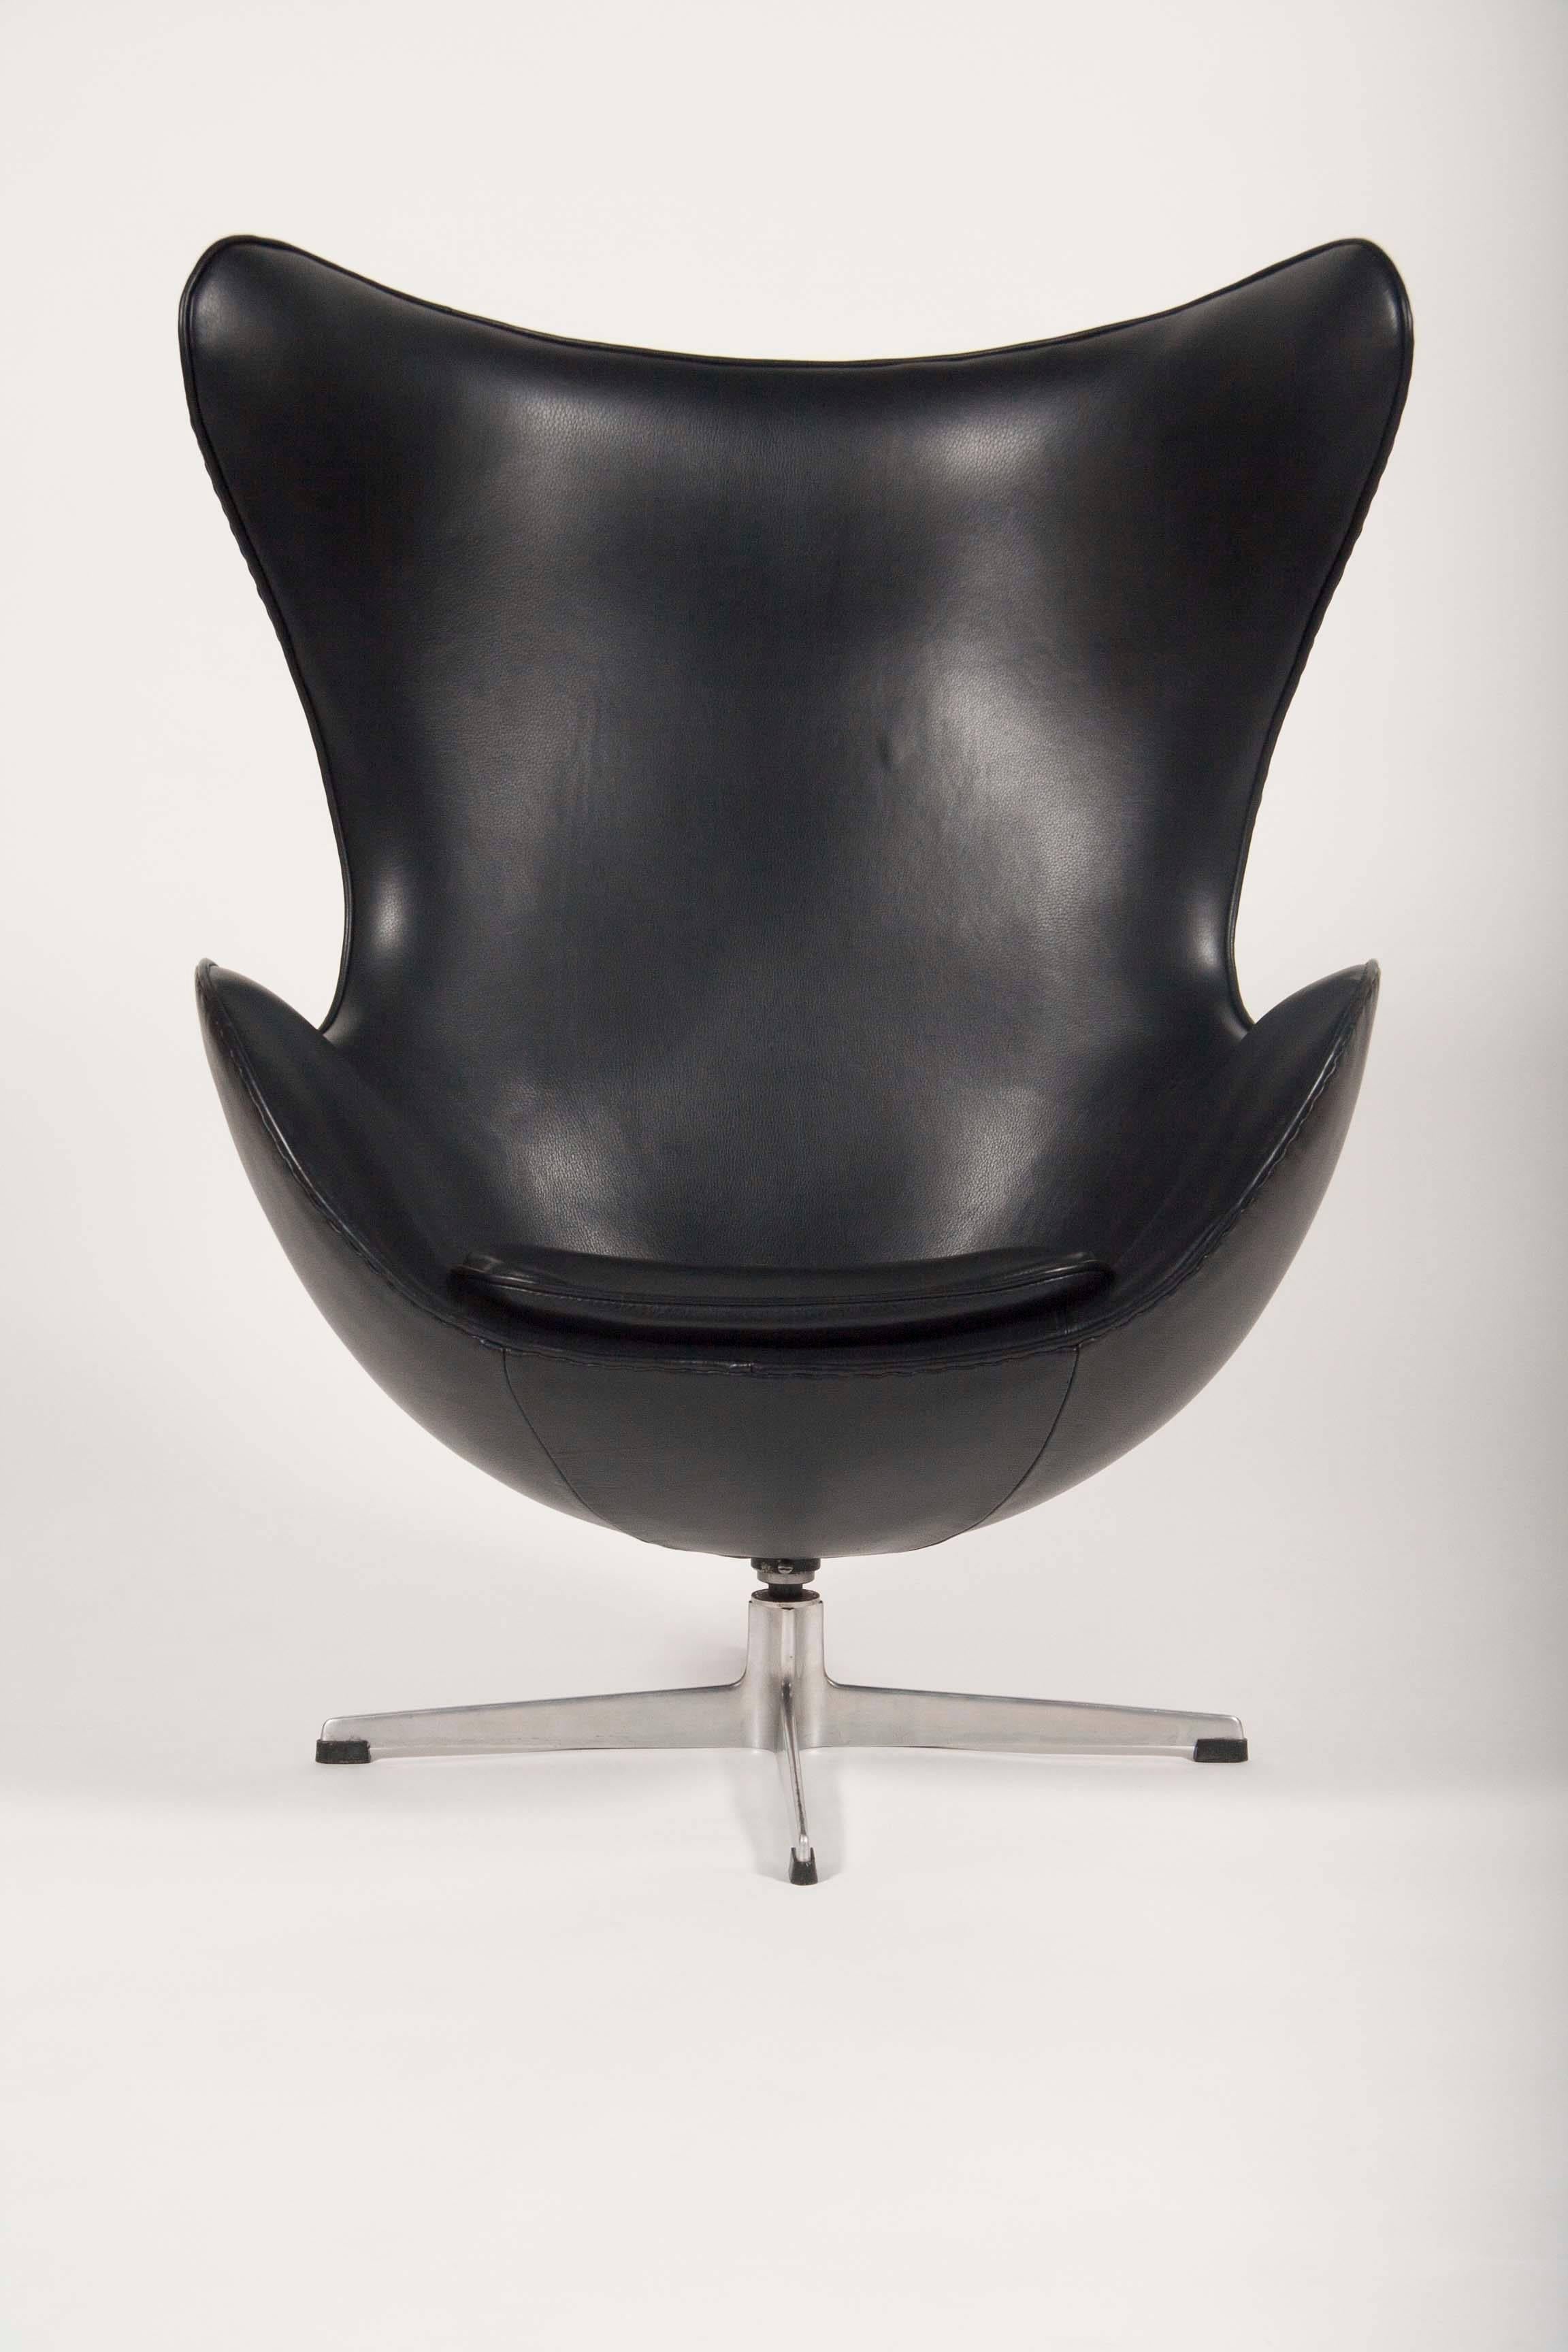 A Mid-Century, leather and chrome armchair designed by Arne Jacobsen and produced by Fritz Hansen. Newly upholstered in Edelman leather.